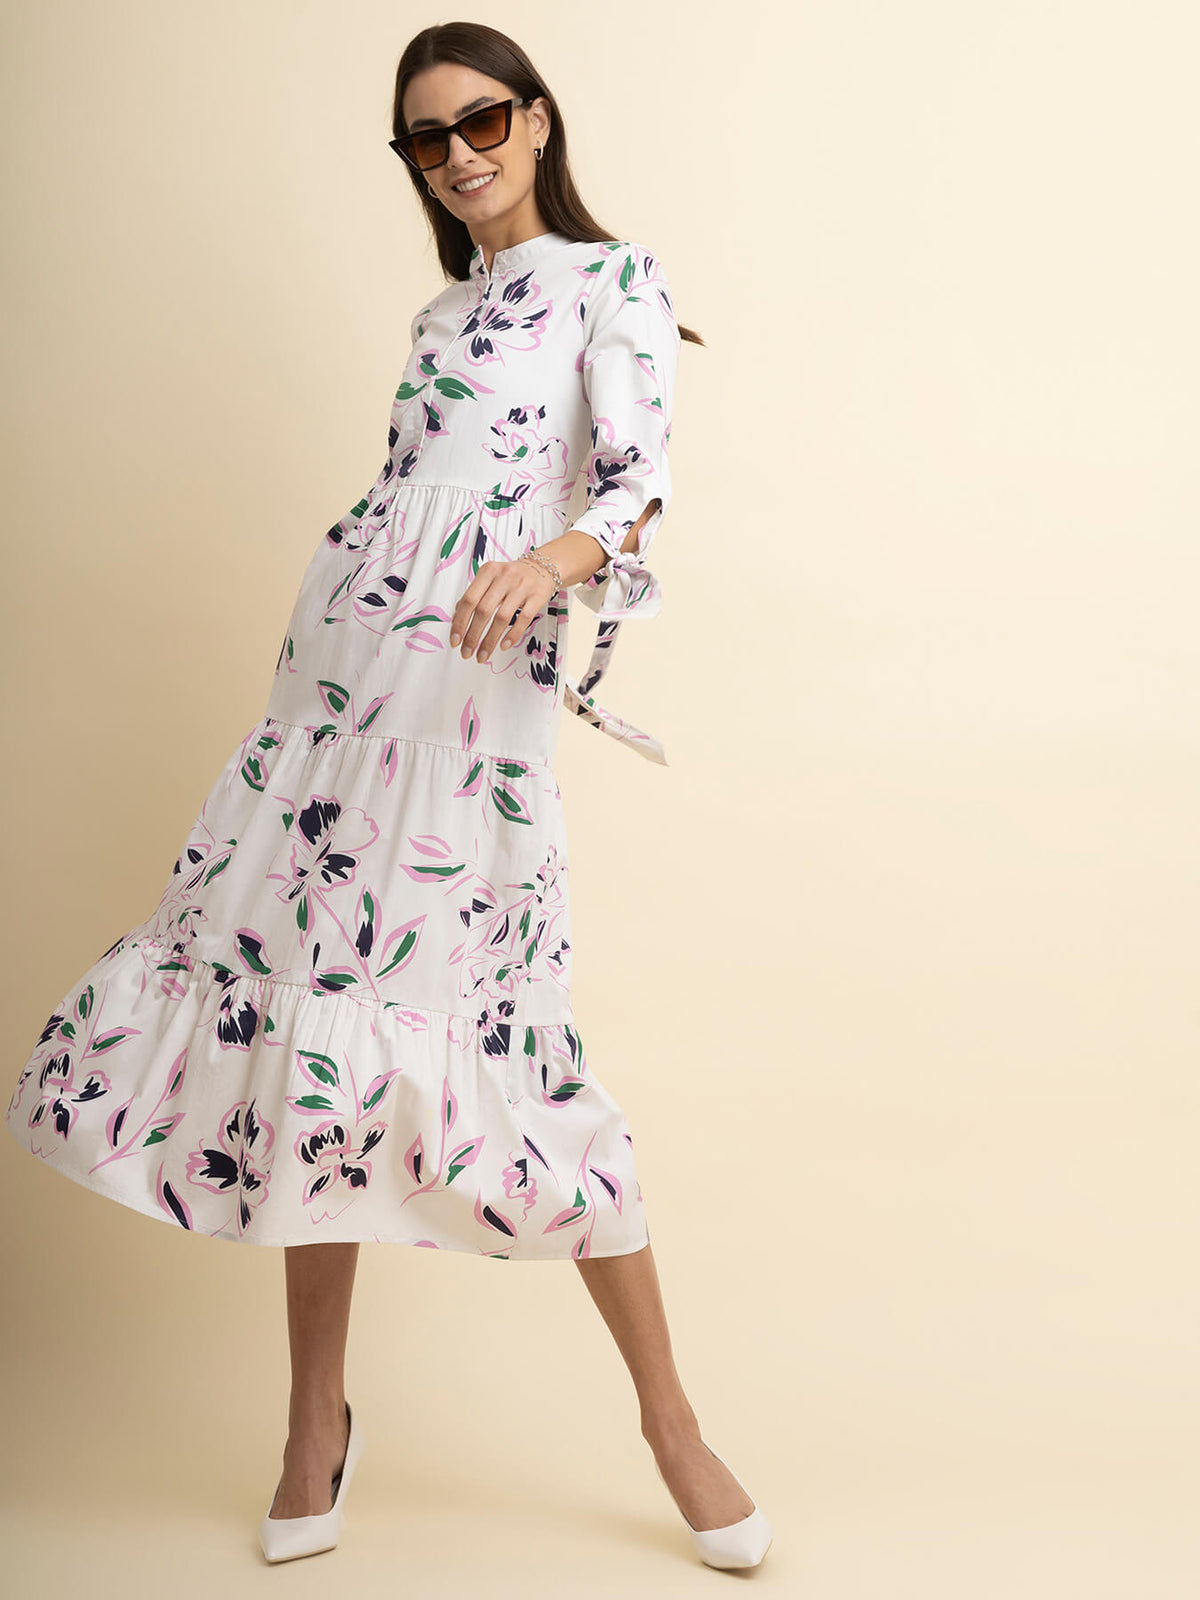 Cotton Floral Tiered Dress - White And Navy